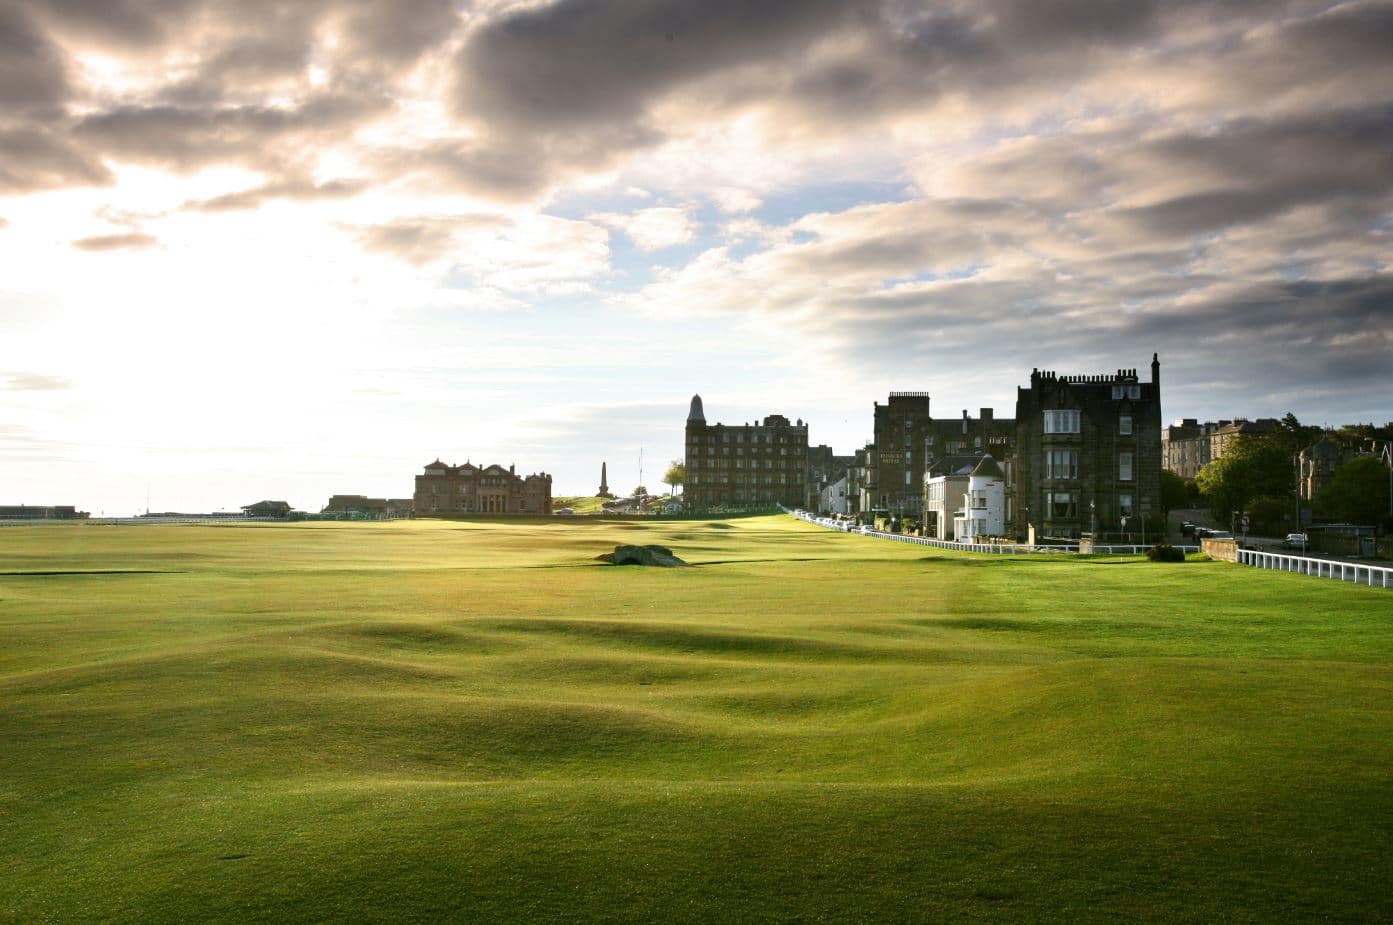 An image of the 18yh hole in St. Andrews